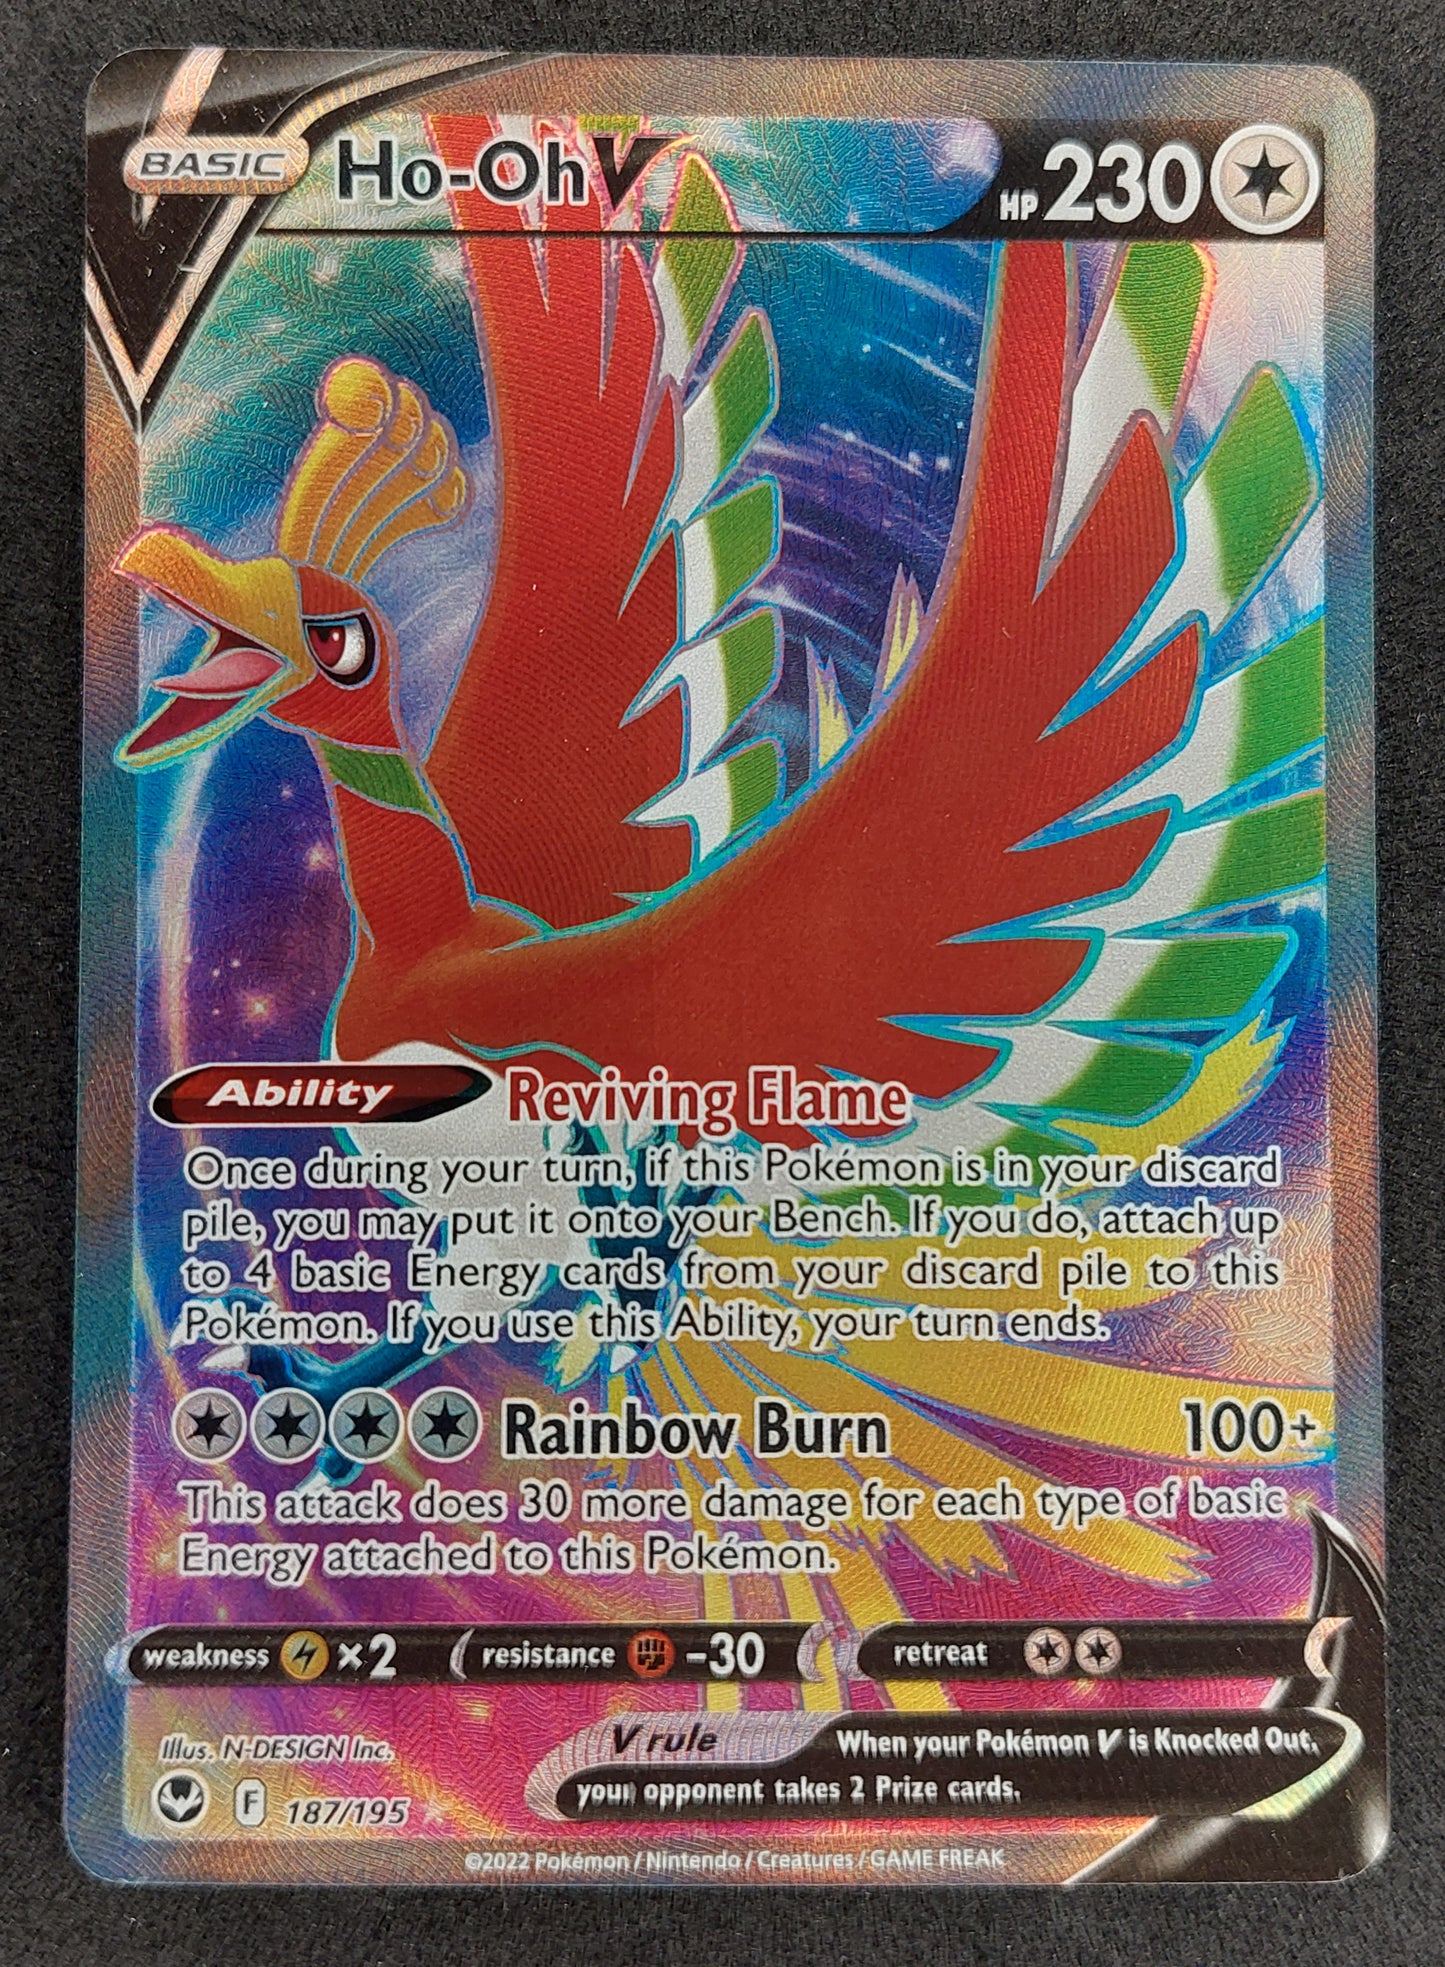 Pokémon Trading Card Game Silver Tempest exclusive Ho-Oh V